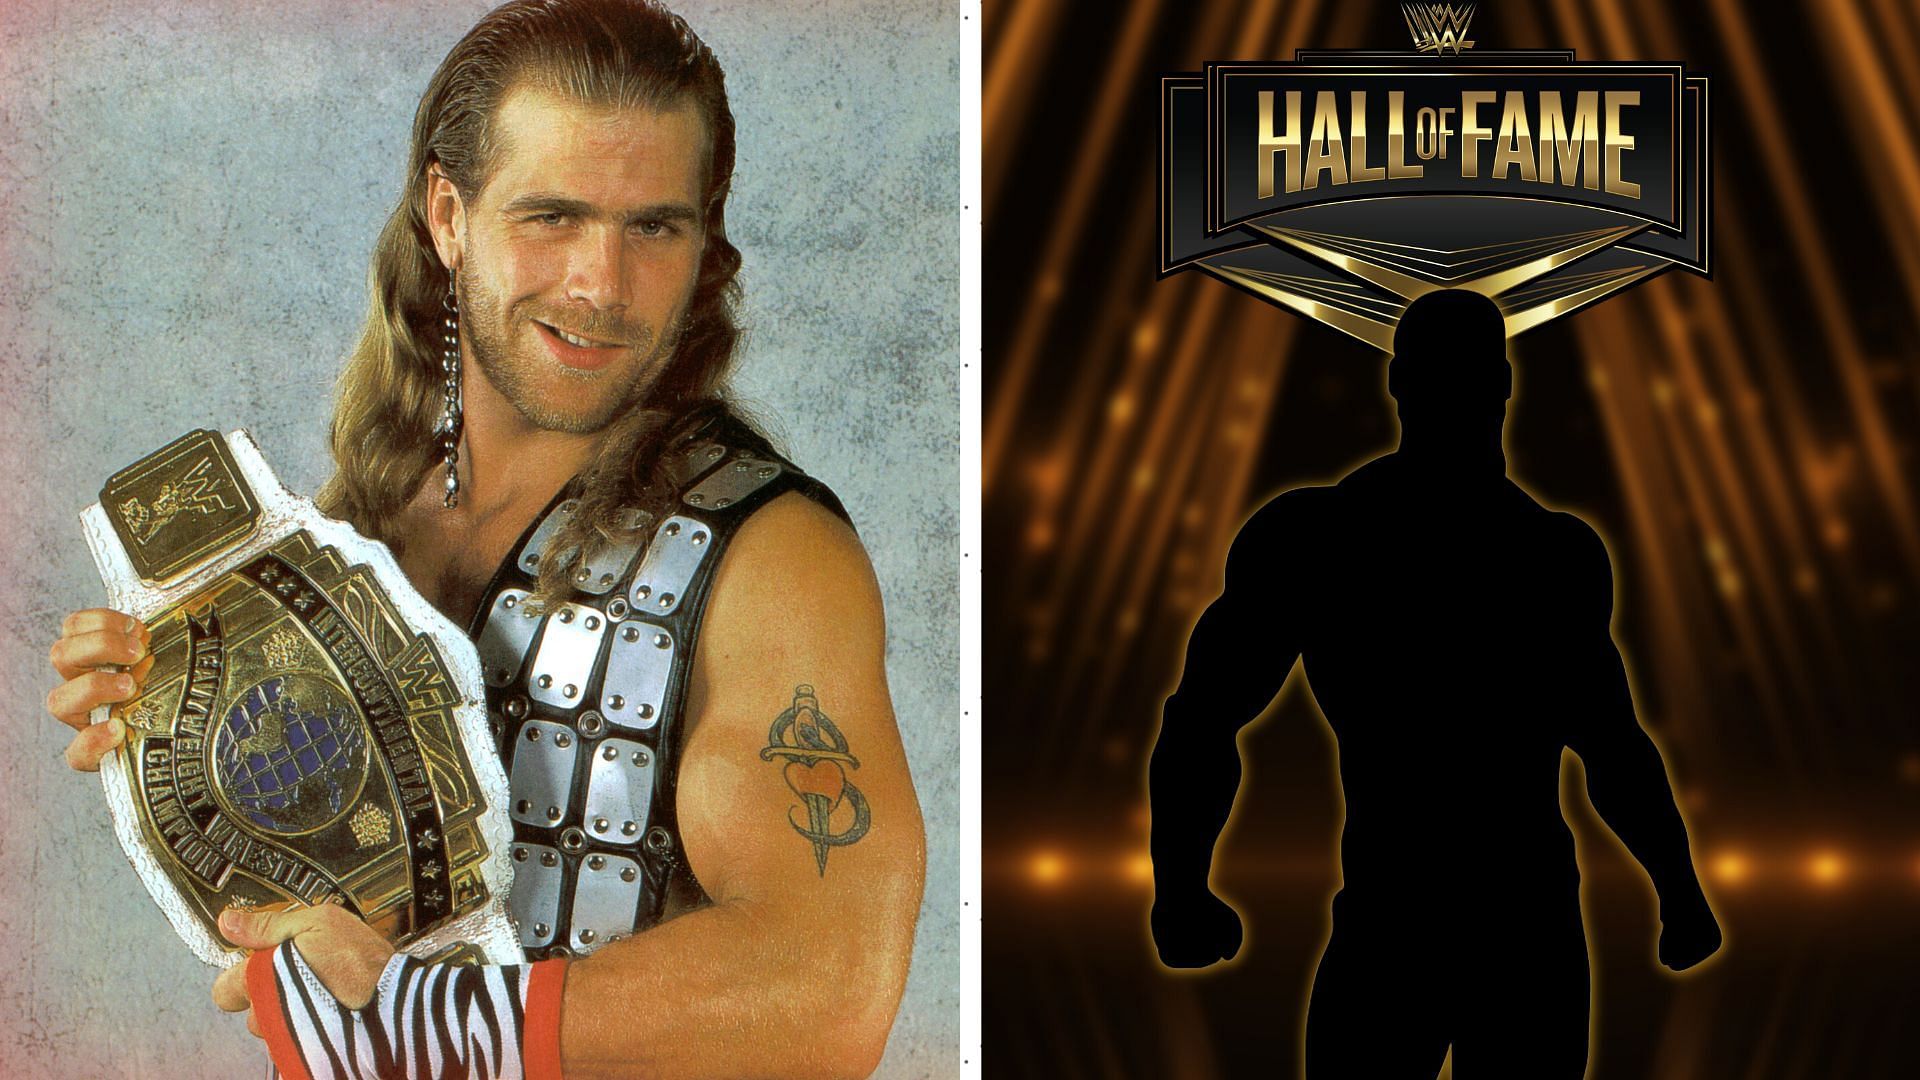 Shawn Michaels is a WWE Hall of Famer